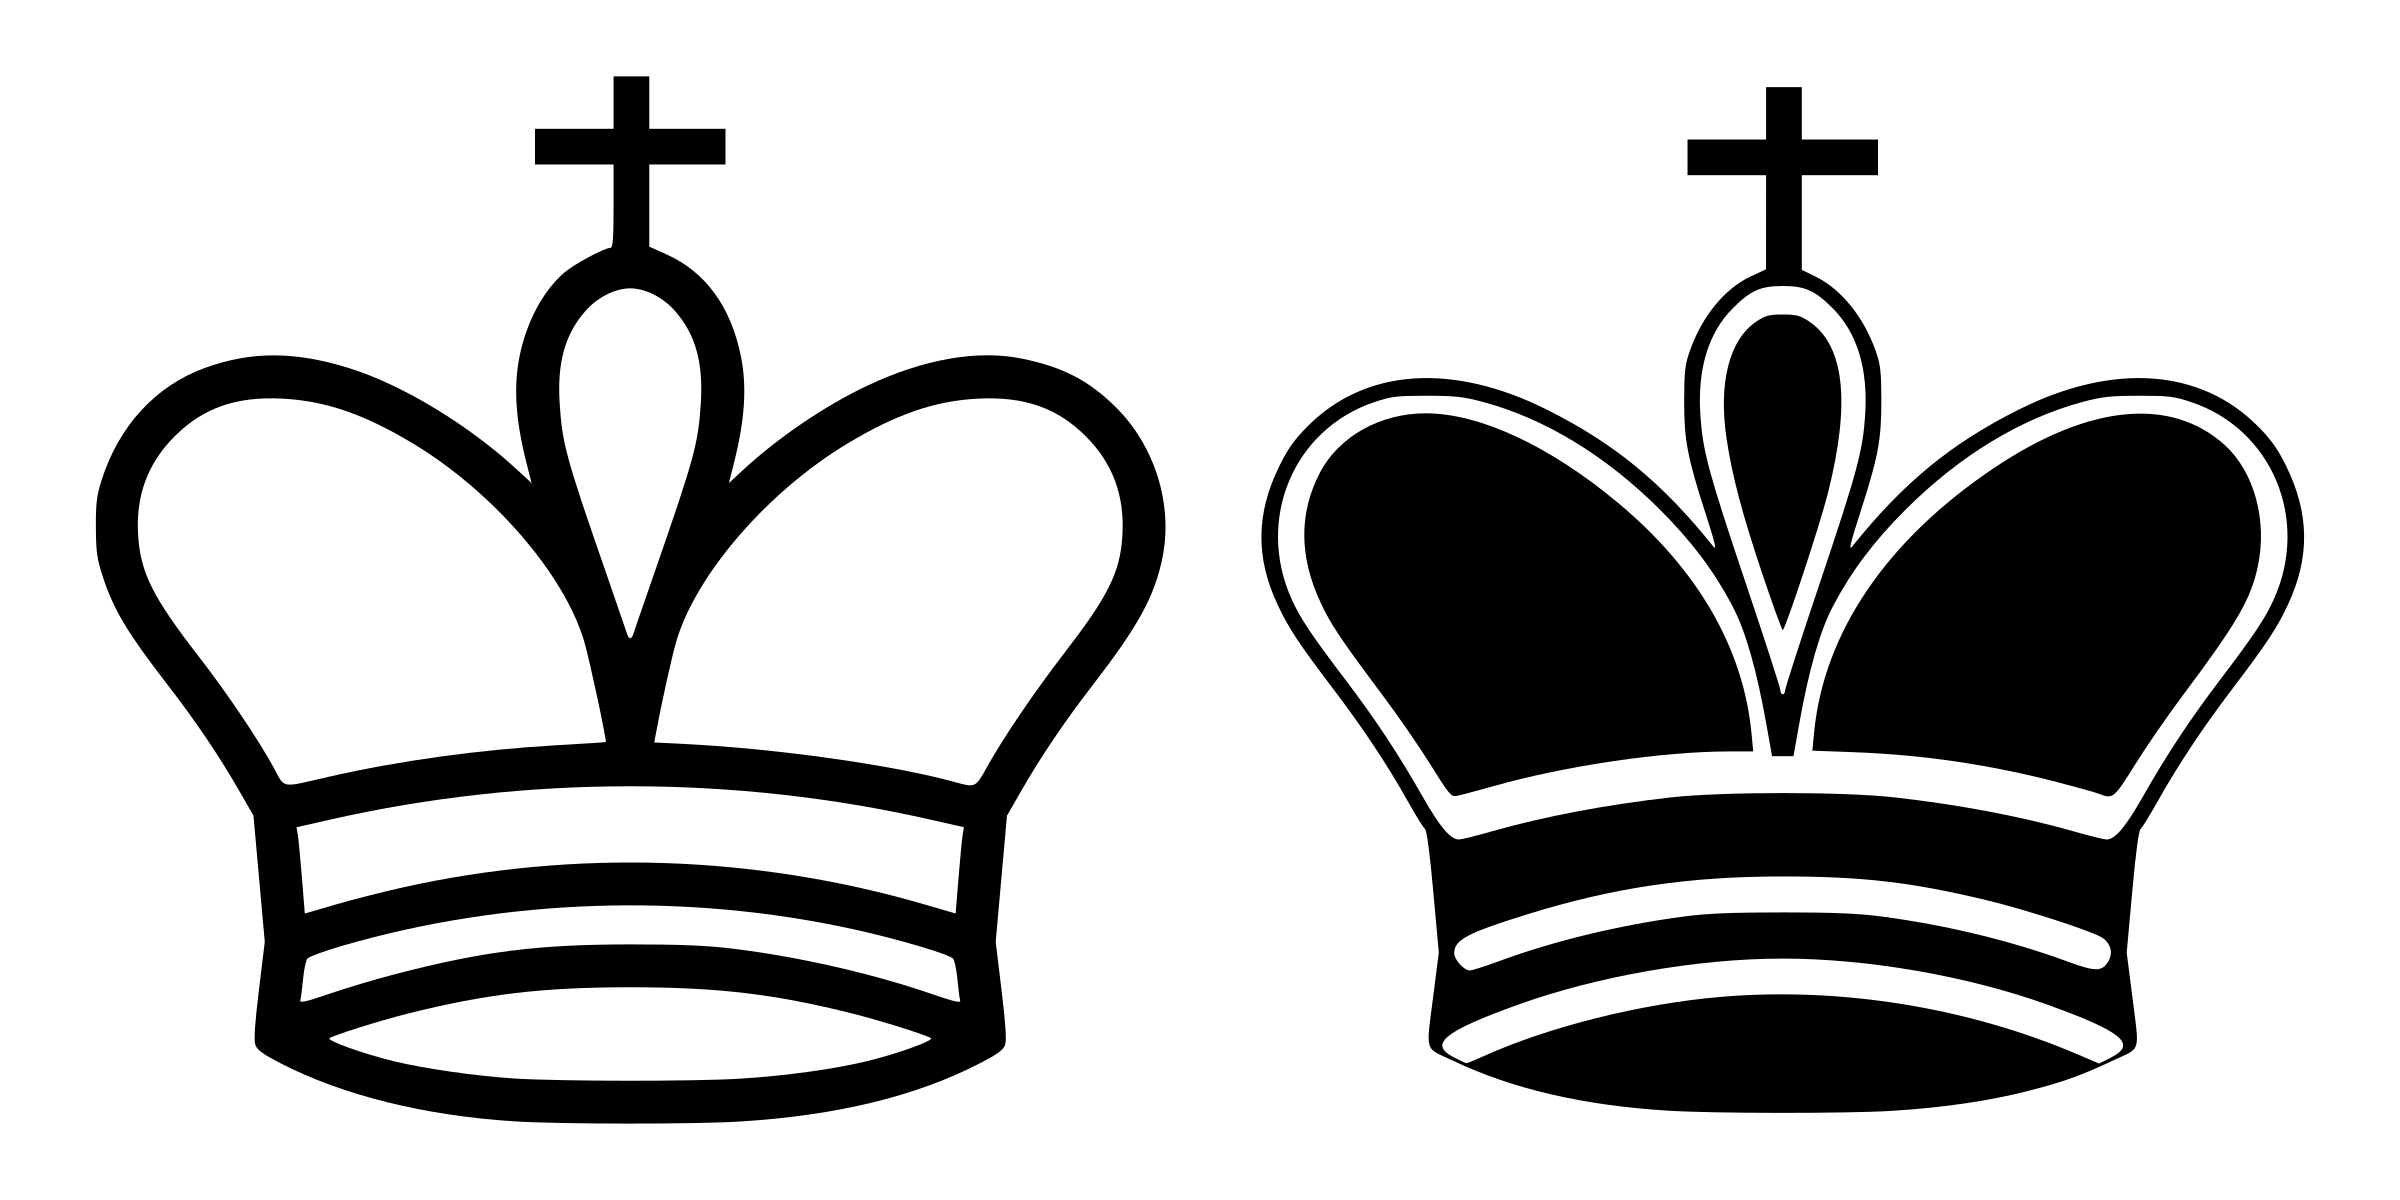 Download Chess King Icon at Vectorified.com | Collection of Chess ...